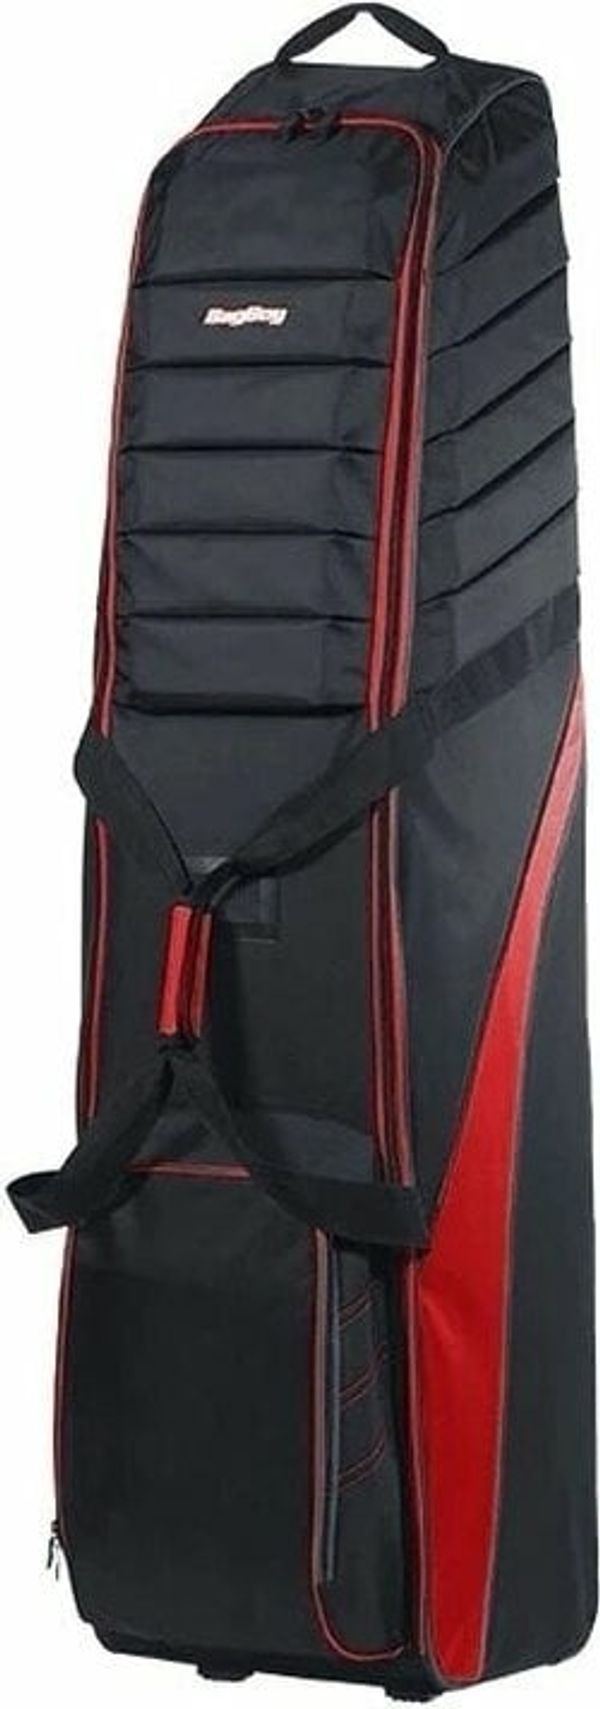 BagBoy BagBoy T-750 Travel Cover Black/Red 2022